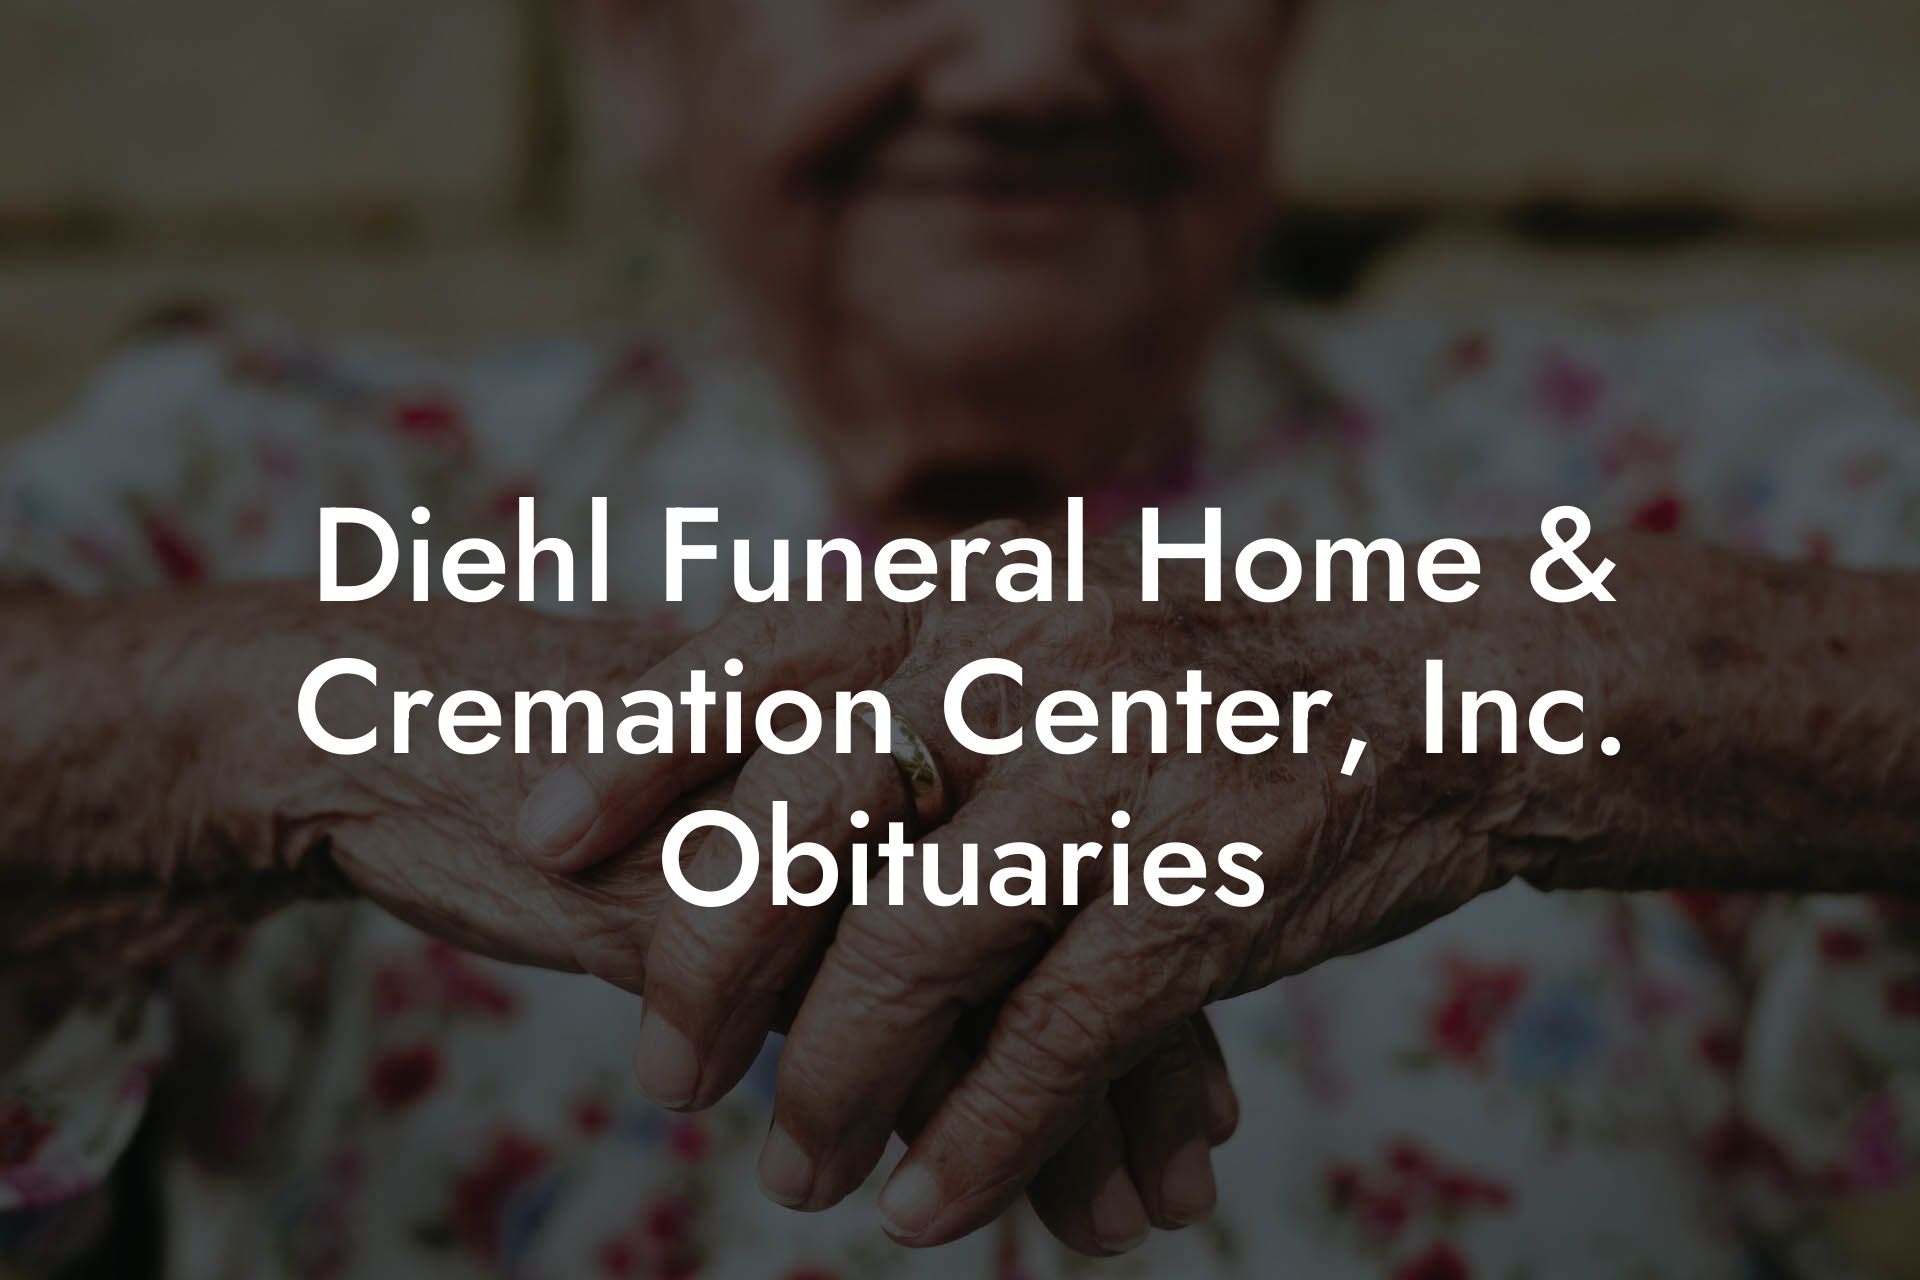 Diehl Funeral Home & Cremation Center, Inc. Obituaries